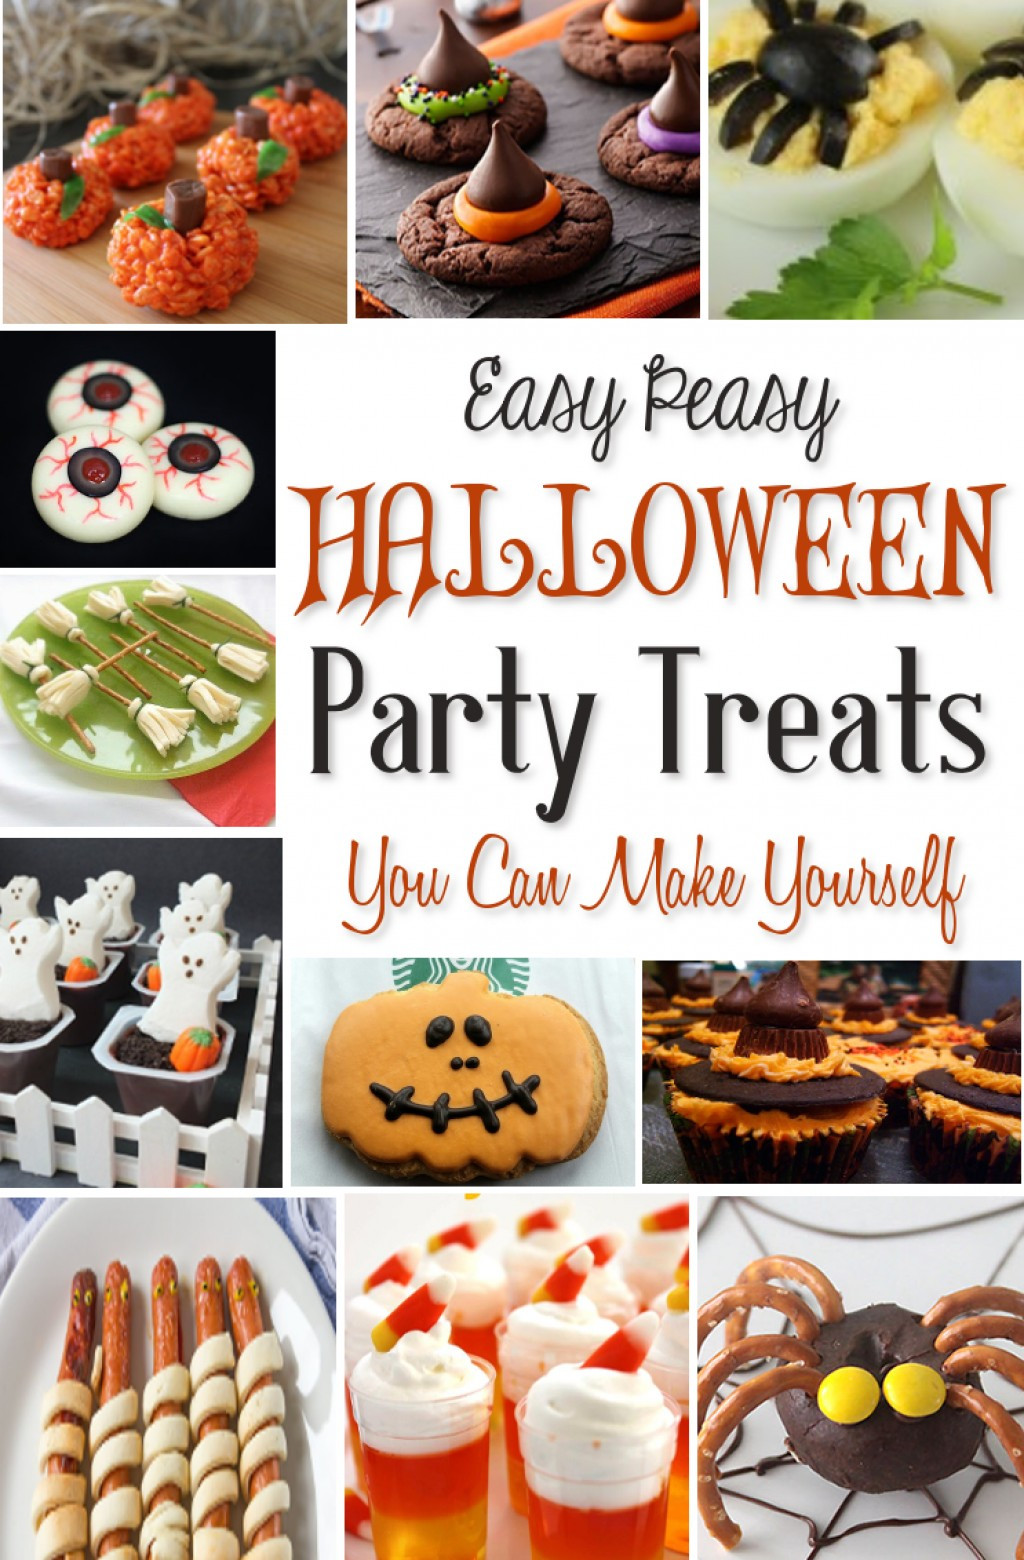 Scary Food Ideas For Halloween Party
 9 Halloween School Party Snack Food Ideas